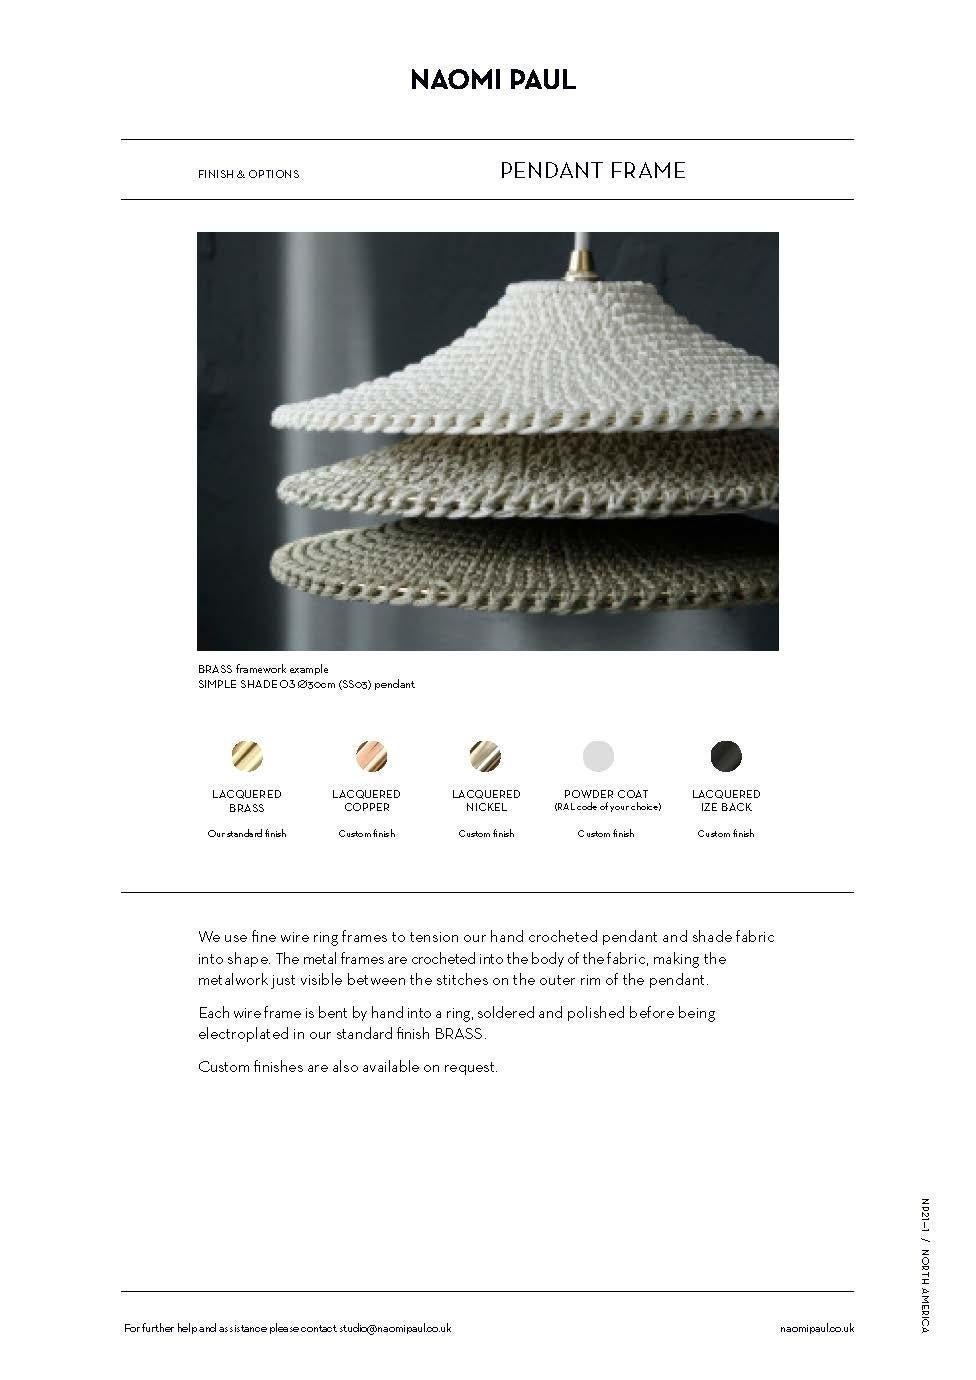 British BAMBOO SOLITAIRE 01 Pendant Light Ø100cm/39.4in, Hand Crocheted in Bamboo Paper